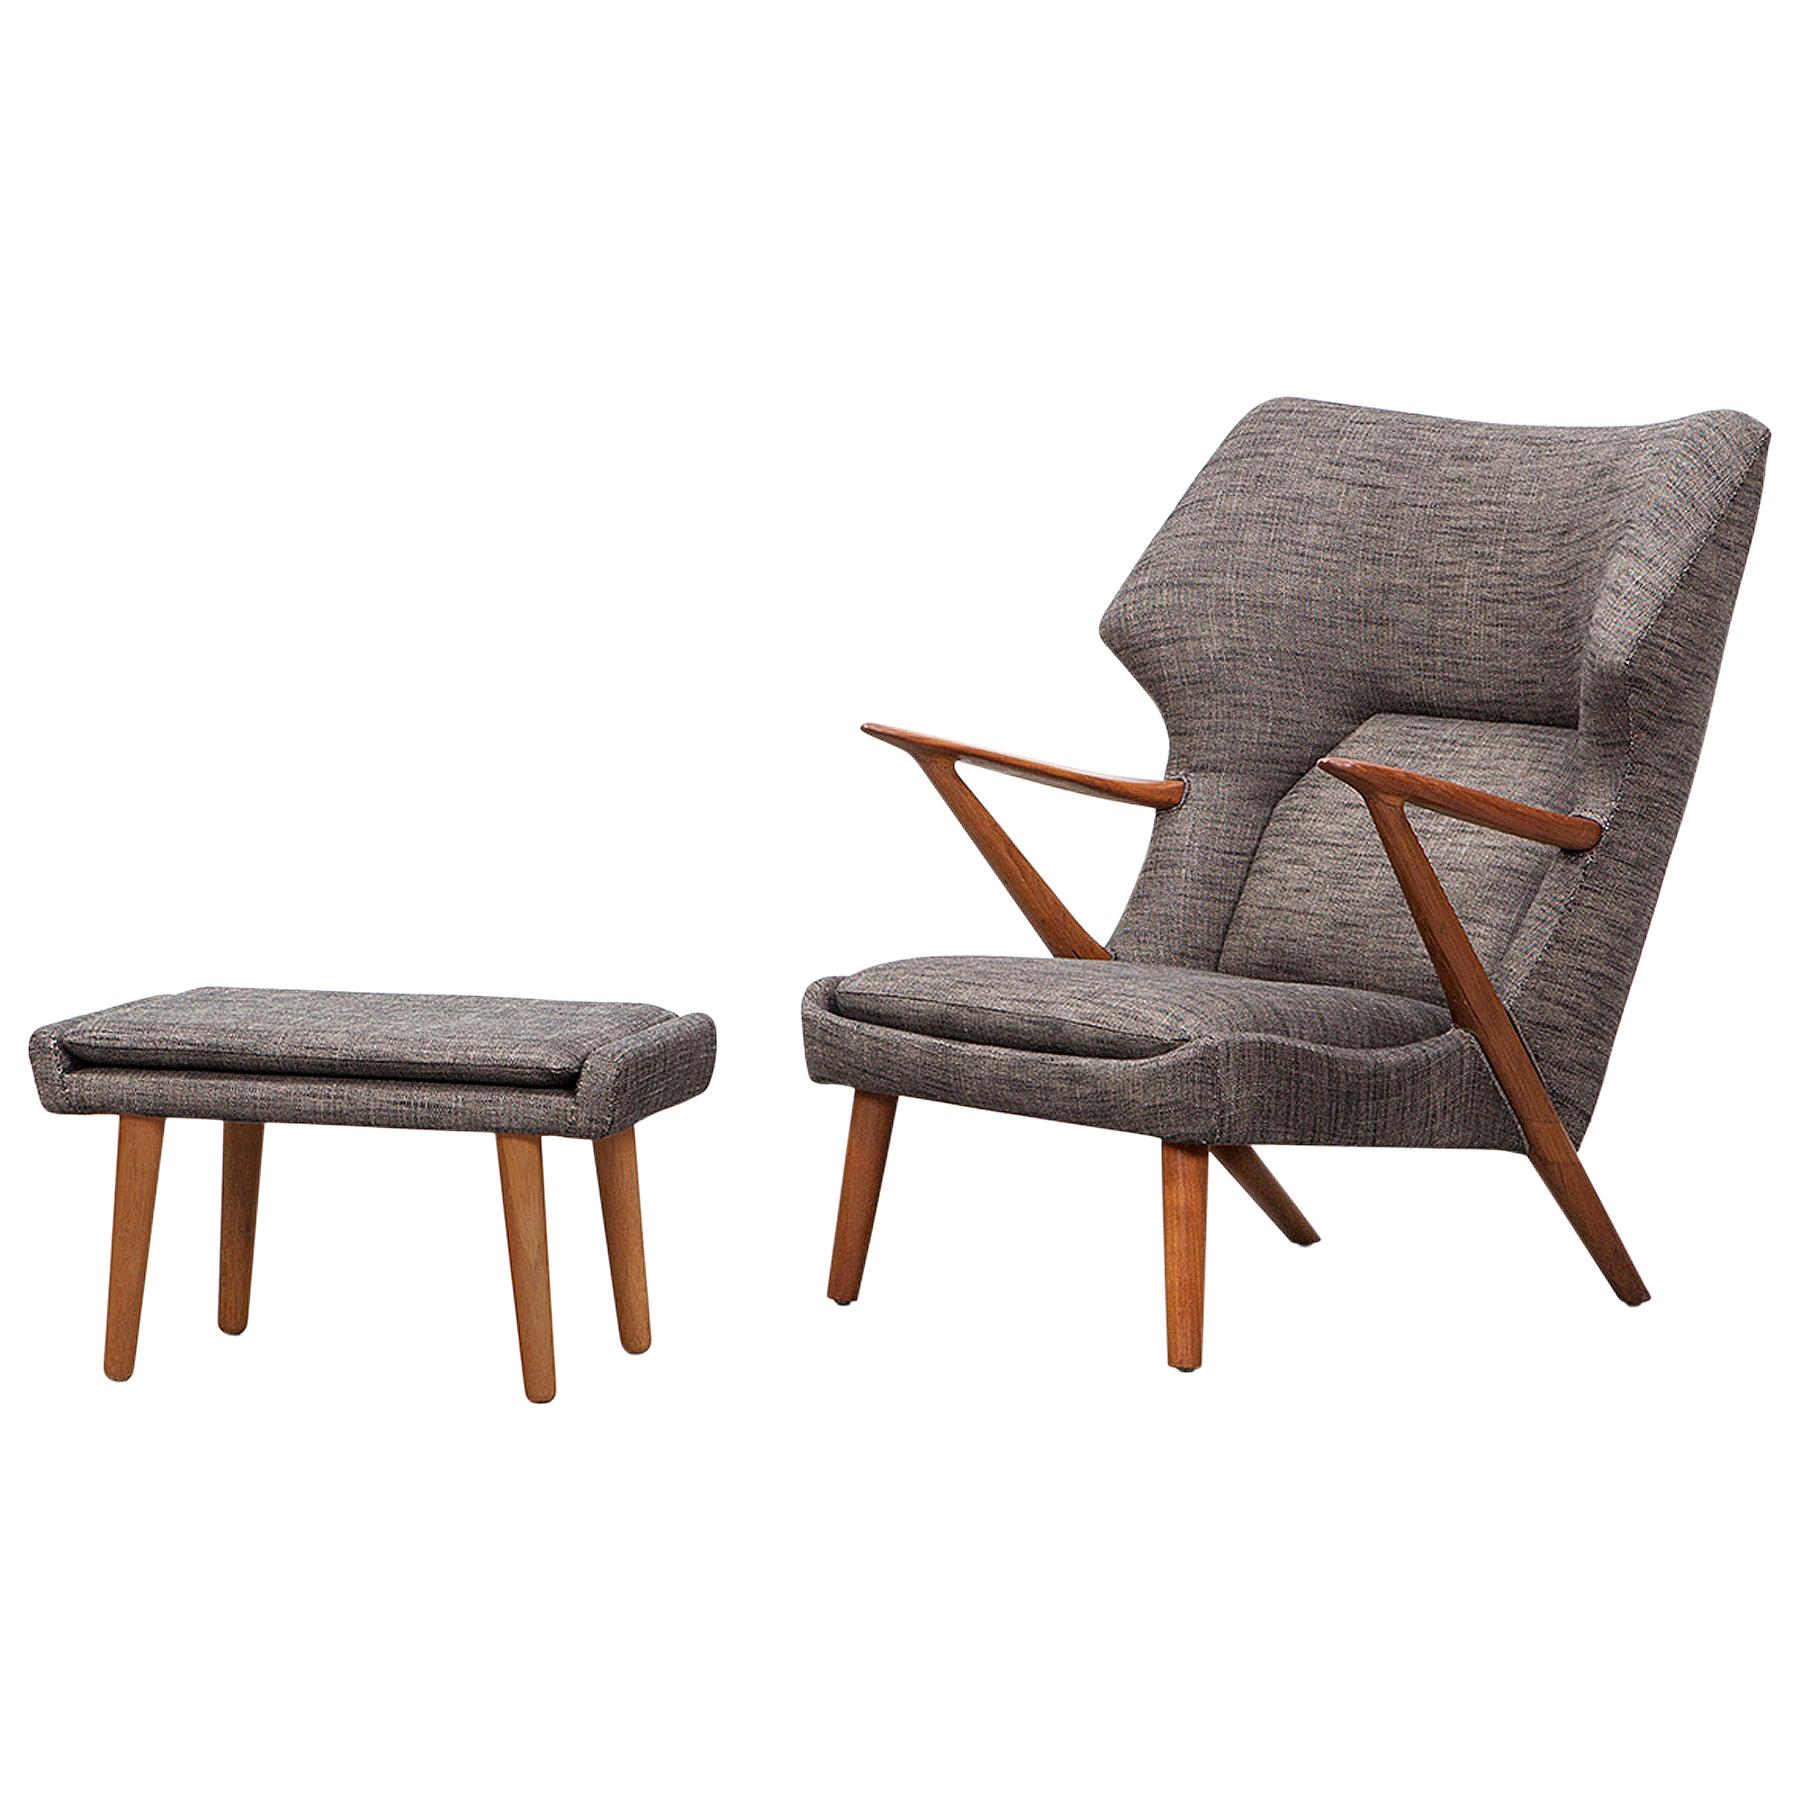 1950s Grey Fabric, Wooden Frame Lounge Chair with Ottoman by Kurt Olsen